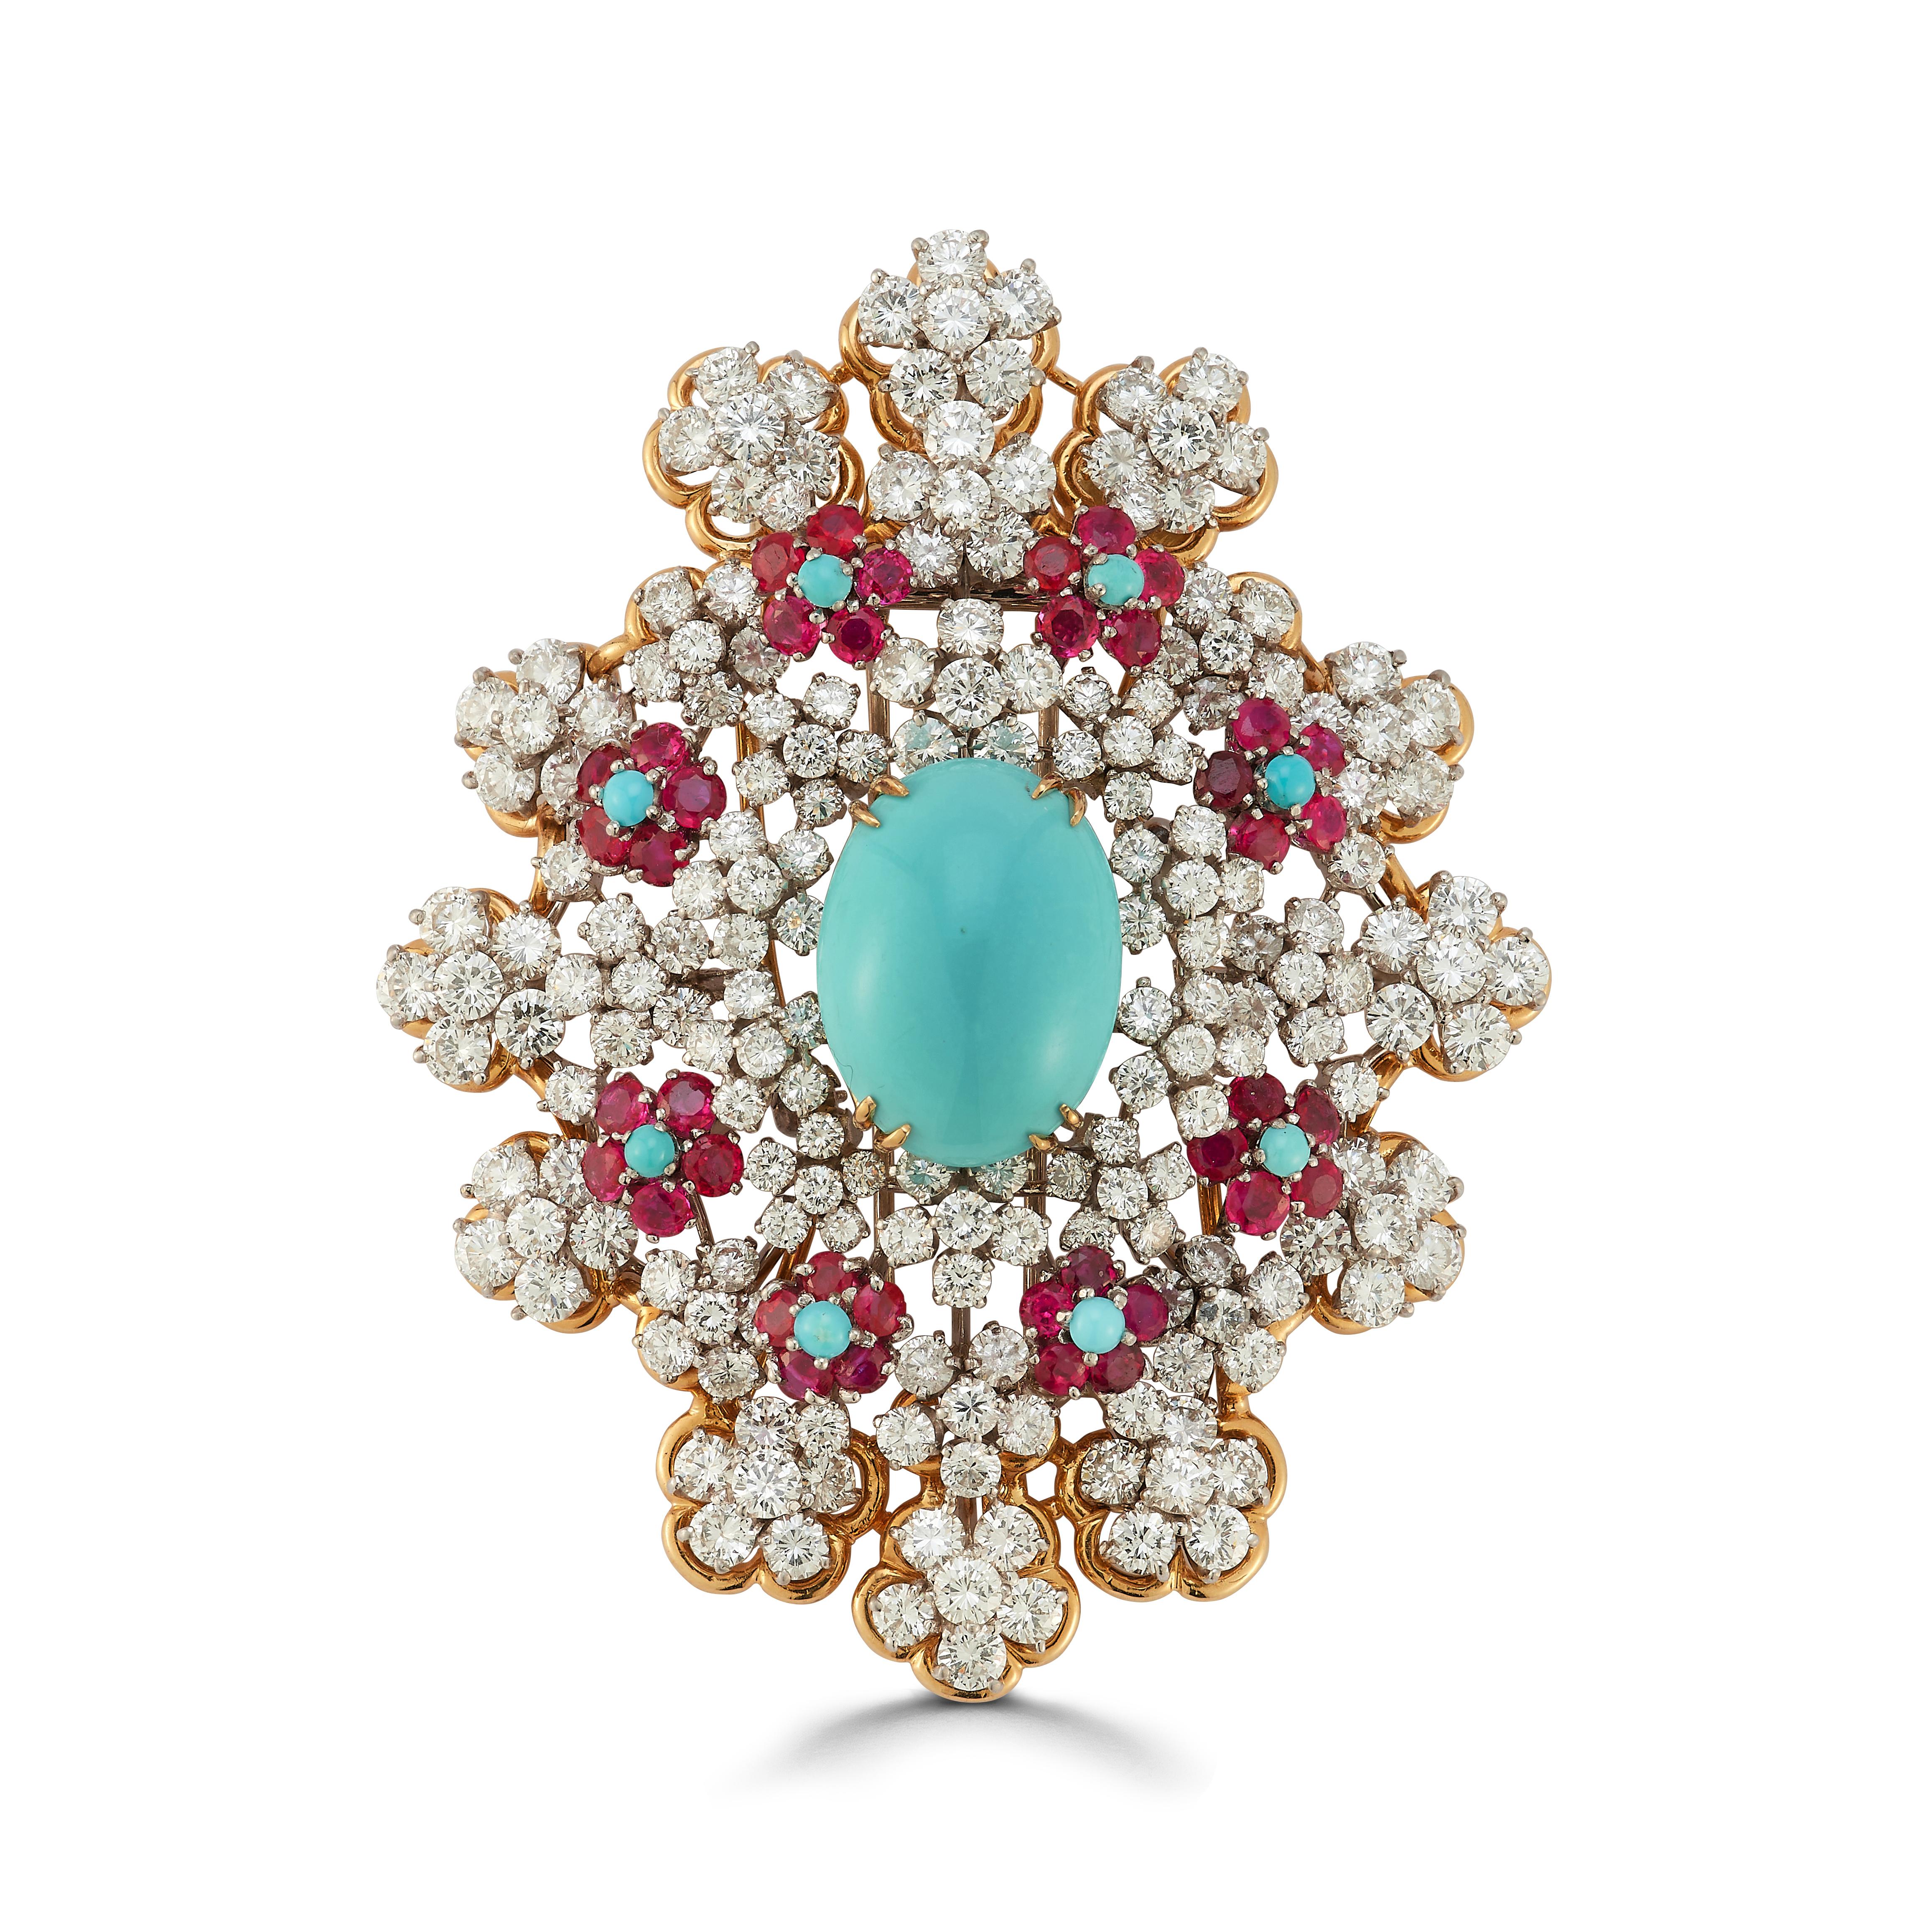 David Webb Turquoise and Ruby Brooch

A platinum and 18 karat gold brooch set with a central cabochon turquoise surrounded by 184 brilliant cut diamonds, 40 brilliant cut rubies, and 8 small cabochon turquoises. The diamonds are set in flower motif